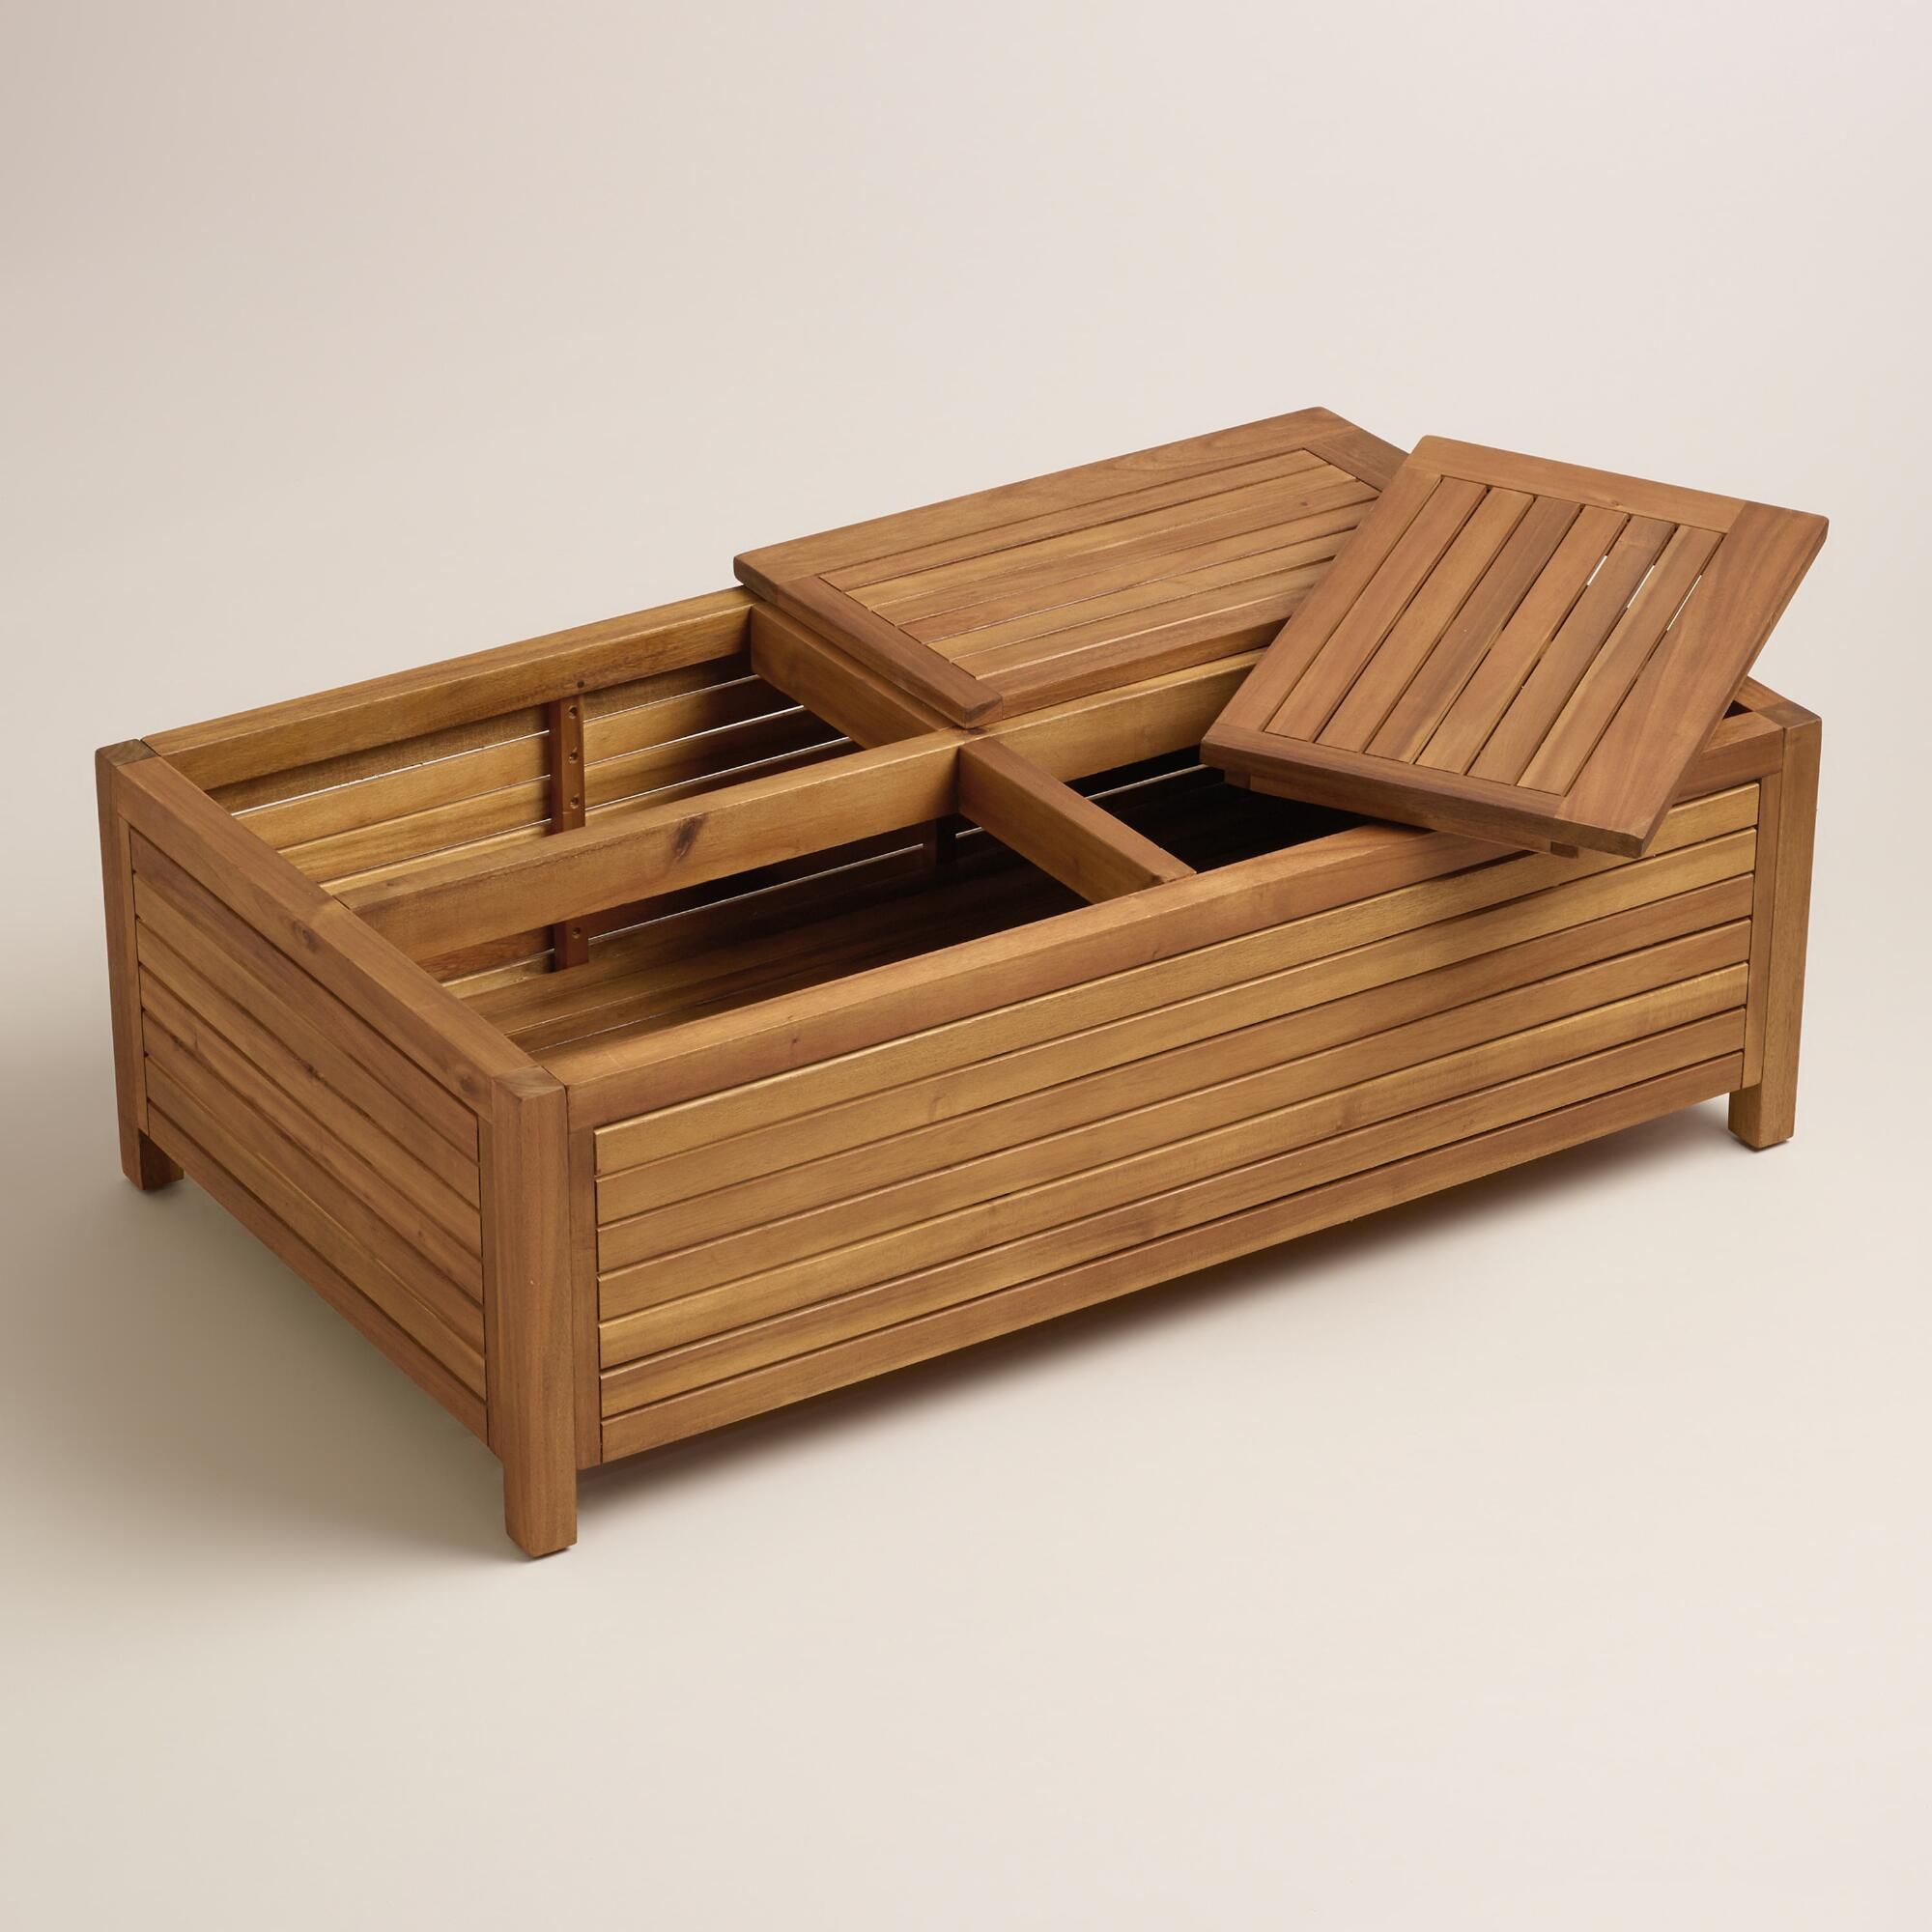 Wood Praiano Outdoor Storage Coffee Table From @worldmarket – A Great Regarding Outdoor Coffee Tables With Storage (View 10 of 20)